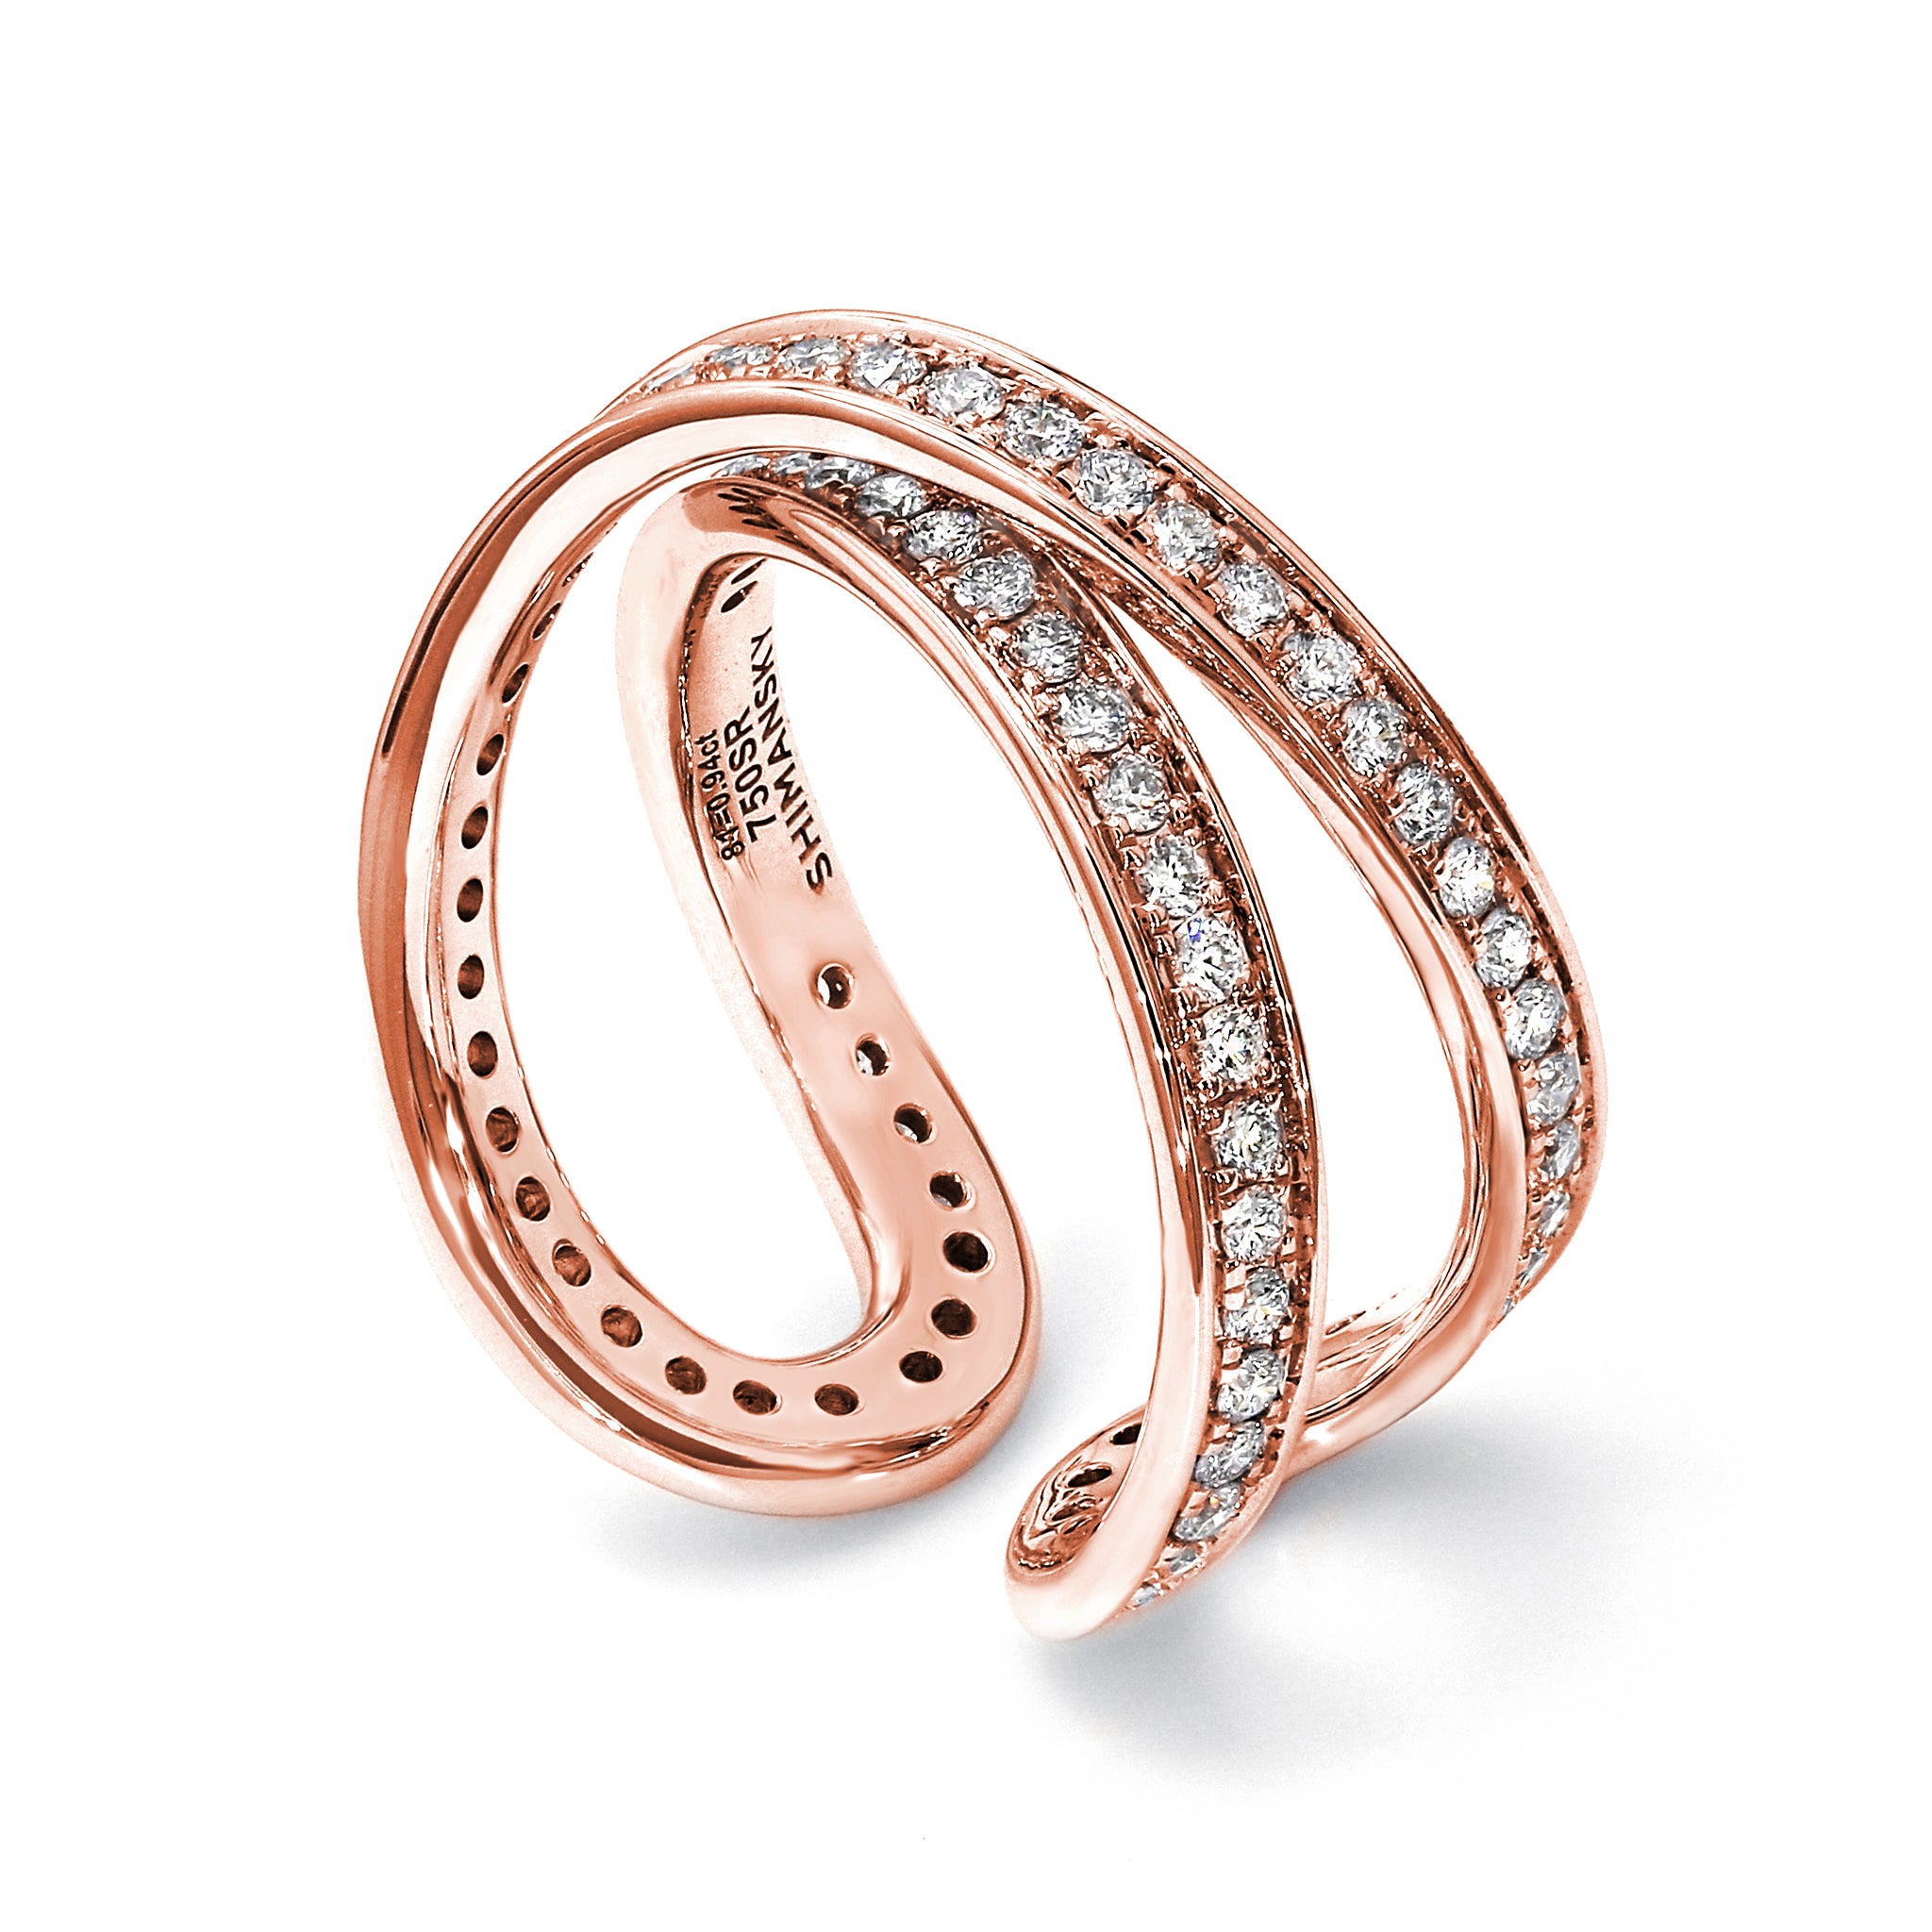 Shimansky - Infinity Classic Pavé Diamond Ring Crafted in 18K Rose Gold